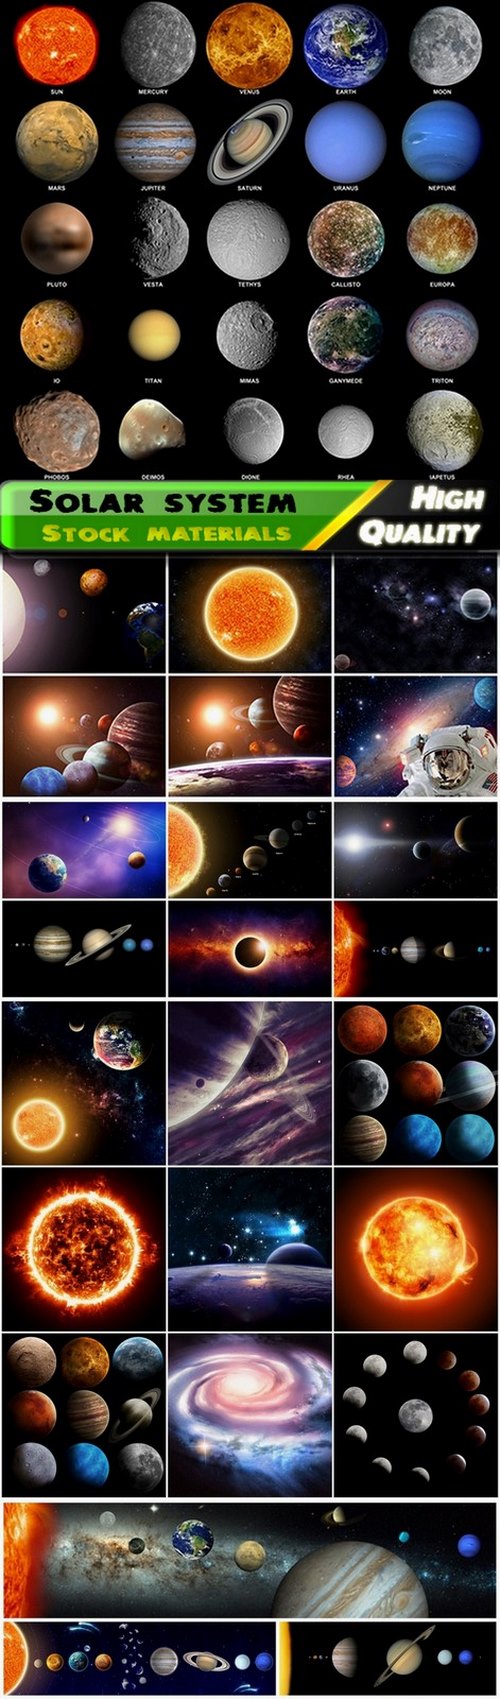 Solar system and the Milky Way - 25 HQ Jpg